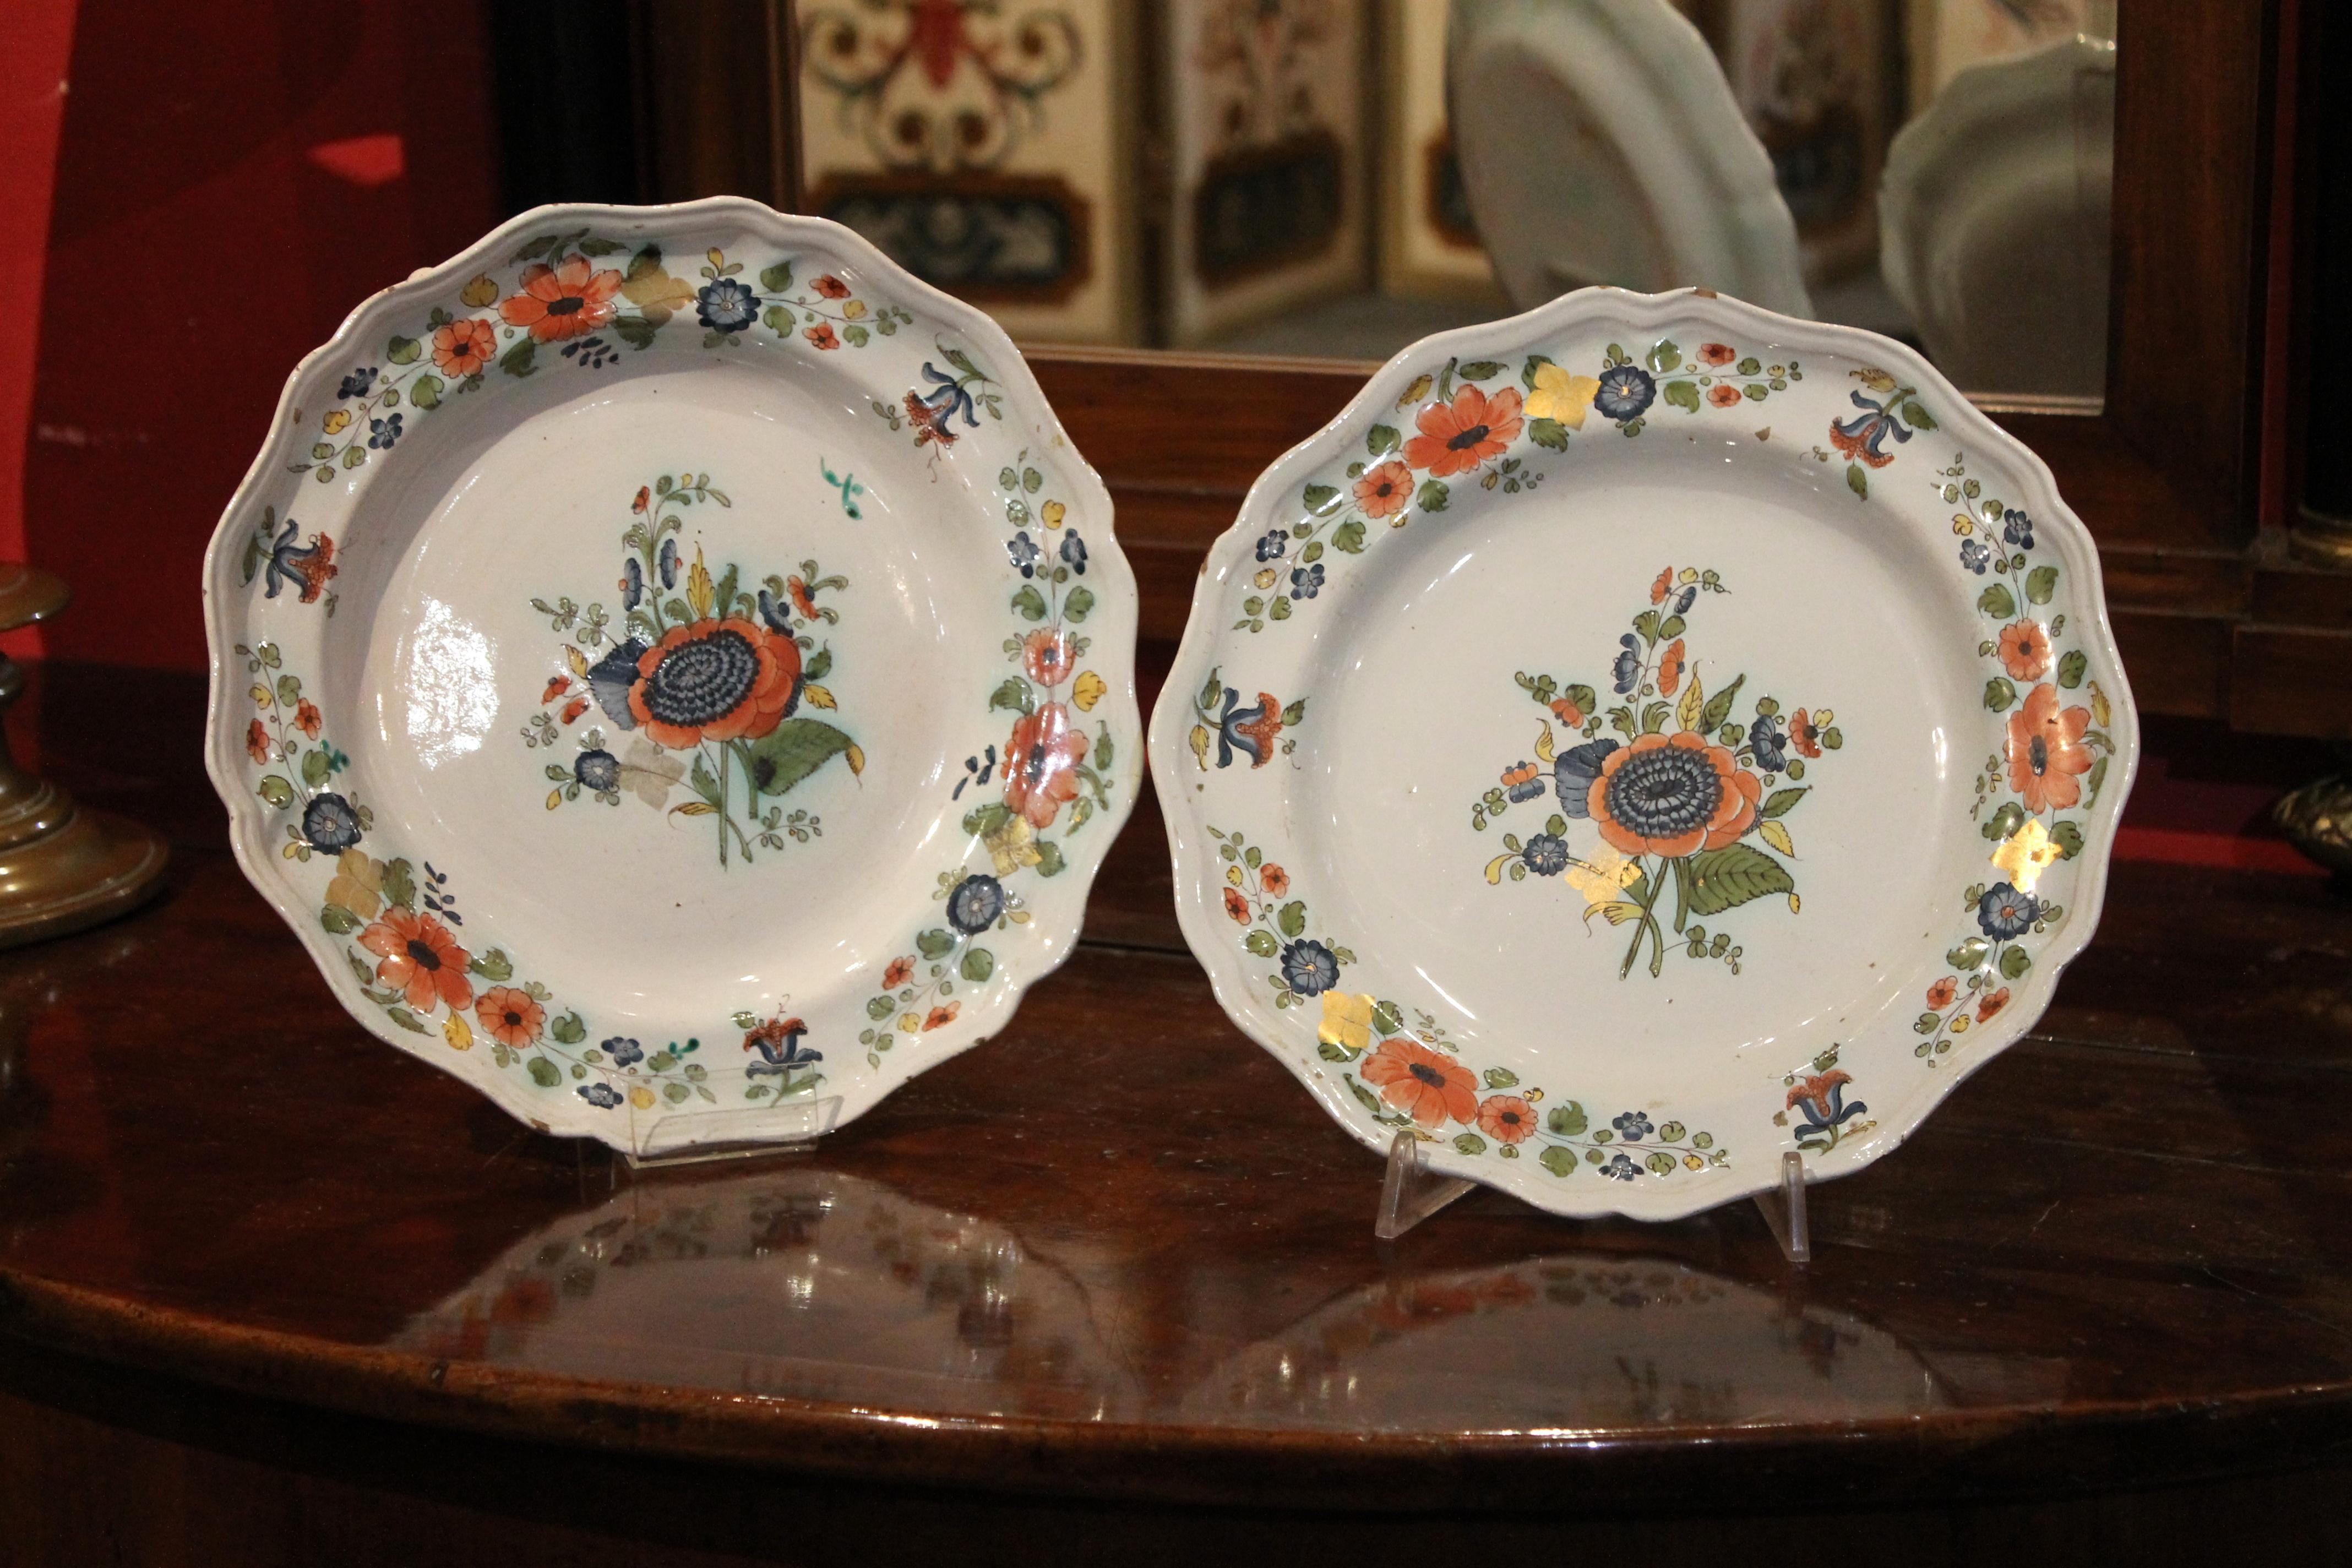 These two beautiful and antique hand painted multi-colored porcelain dishes date back to 1700.
Each plate has shaped rims with molded and trimmed relief, the white porcelain background is decorated with flowers and leaves throughout.
A bouquet of